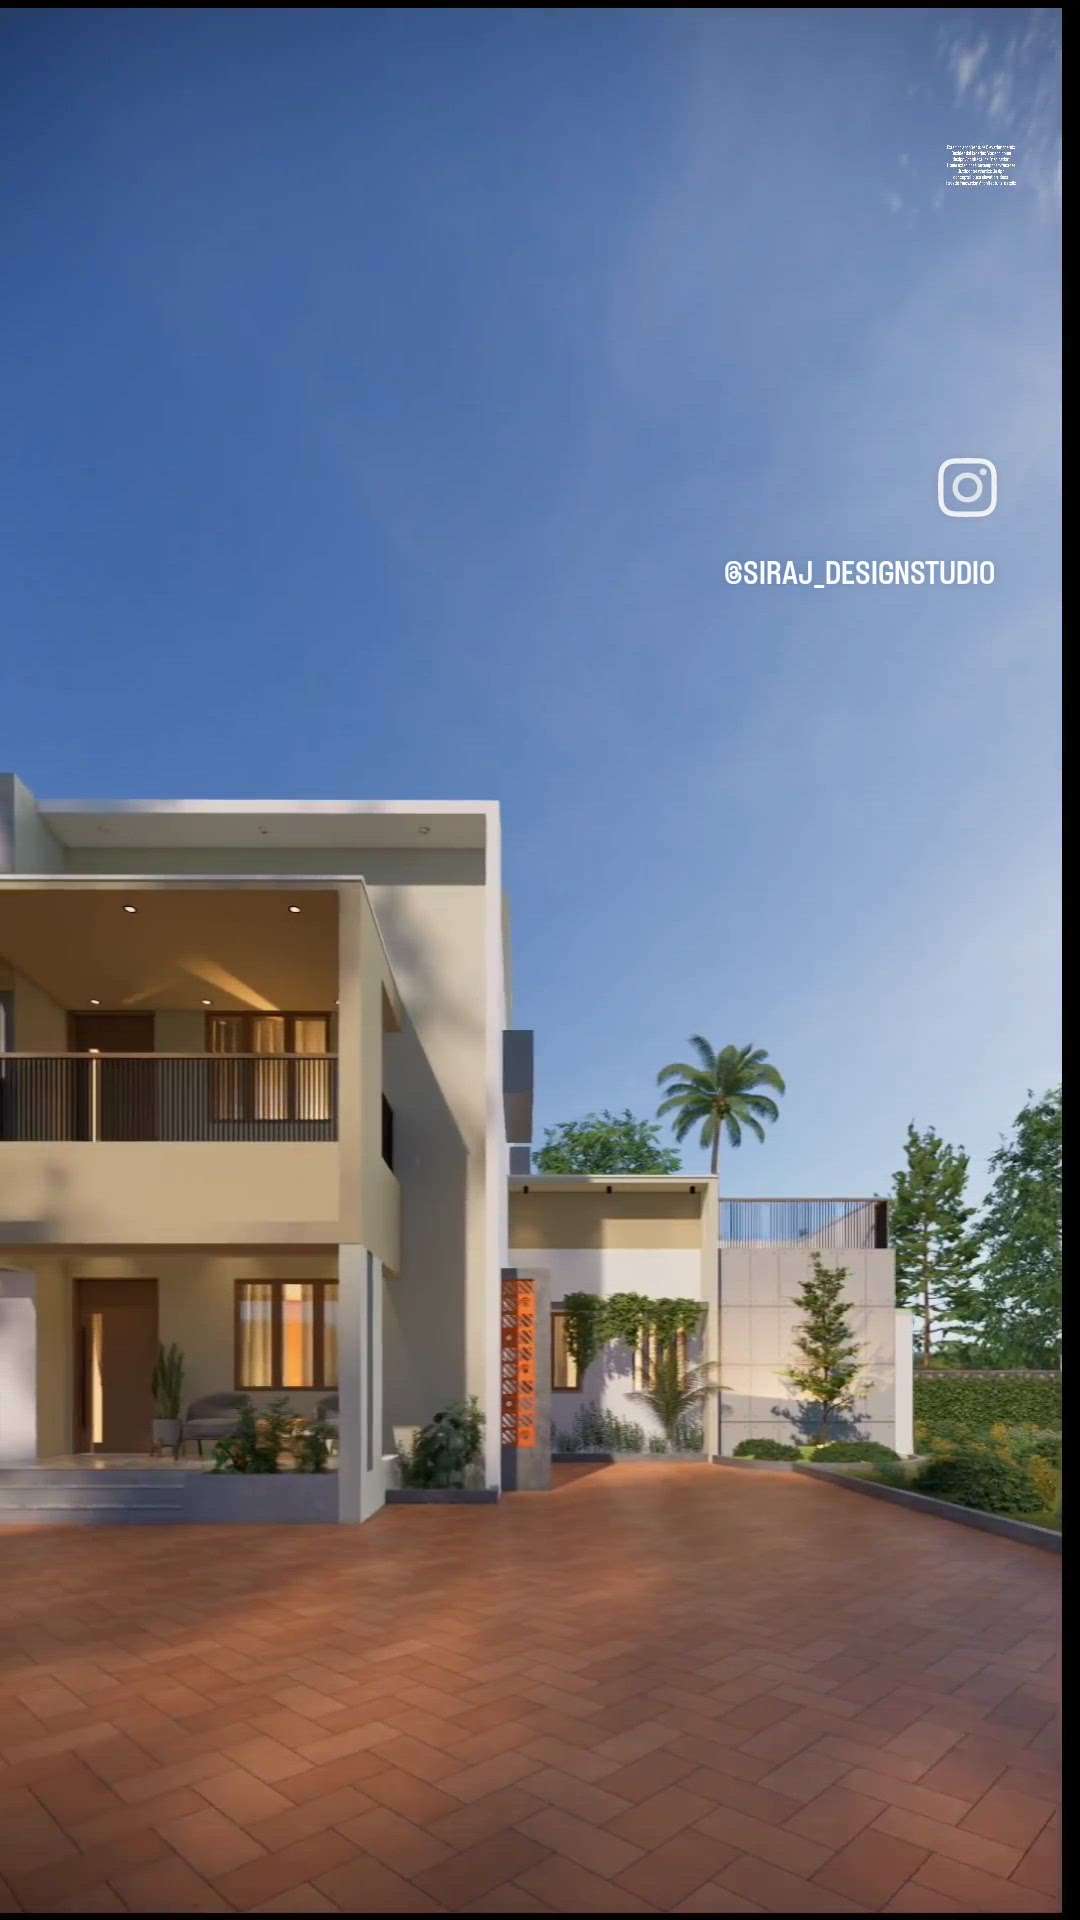 New Exterior Design🌟
Built up area - 2500 sq.ft
4BHK
📍Malappuram

Got ideas or inquiries? We're all ears! Contact us and let's turn your visions into reality. Your dream project starts with a simple message.
 #Architect #CivilEngineer #3d #3d_Animations #exteriordesigns #KeralaStyleHouse #keralastyle #koloviral #kolopost #viralvideo #viralkolo #animation #ElevationHome #modernhousedesigns